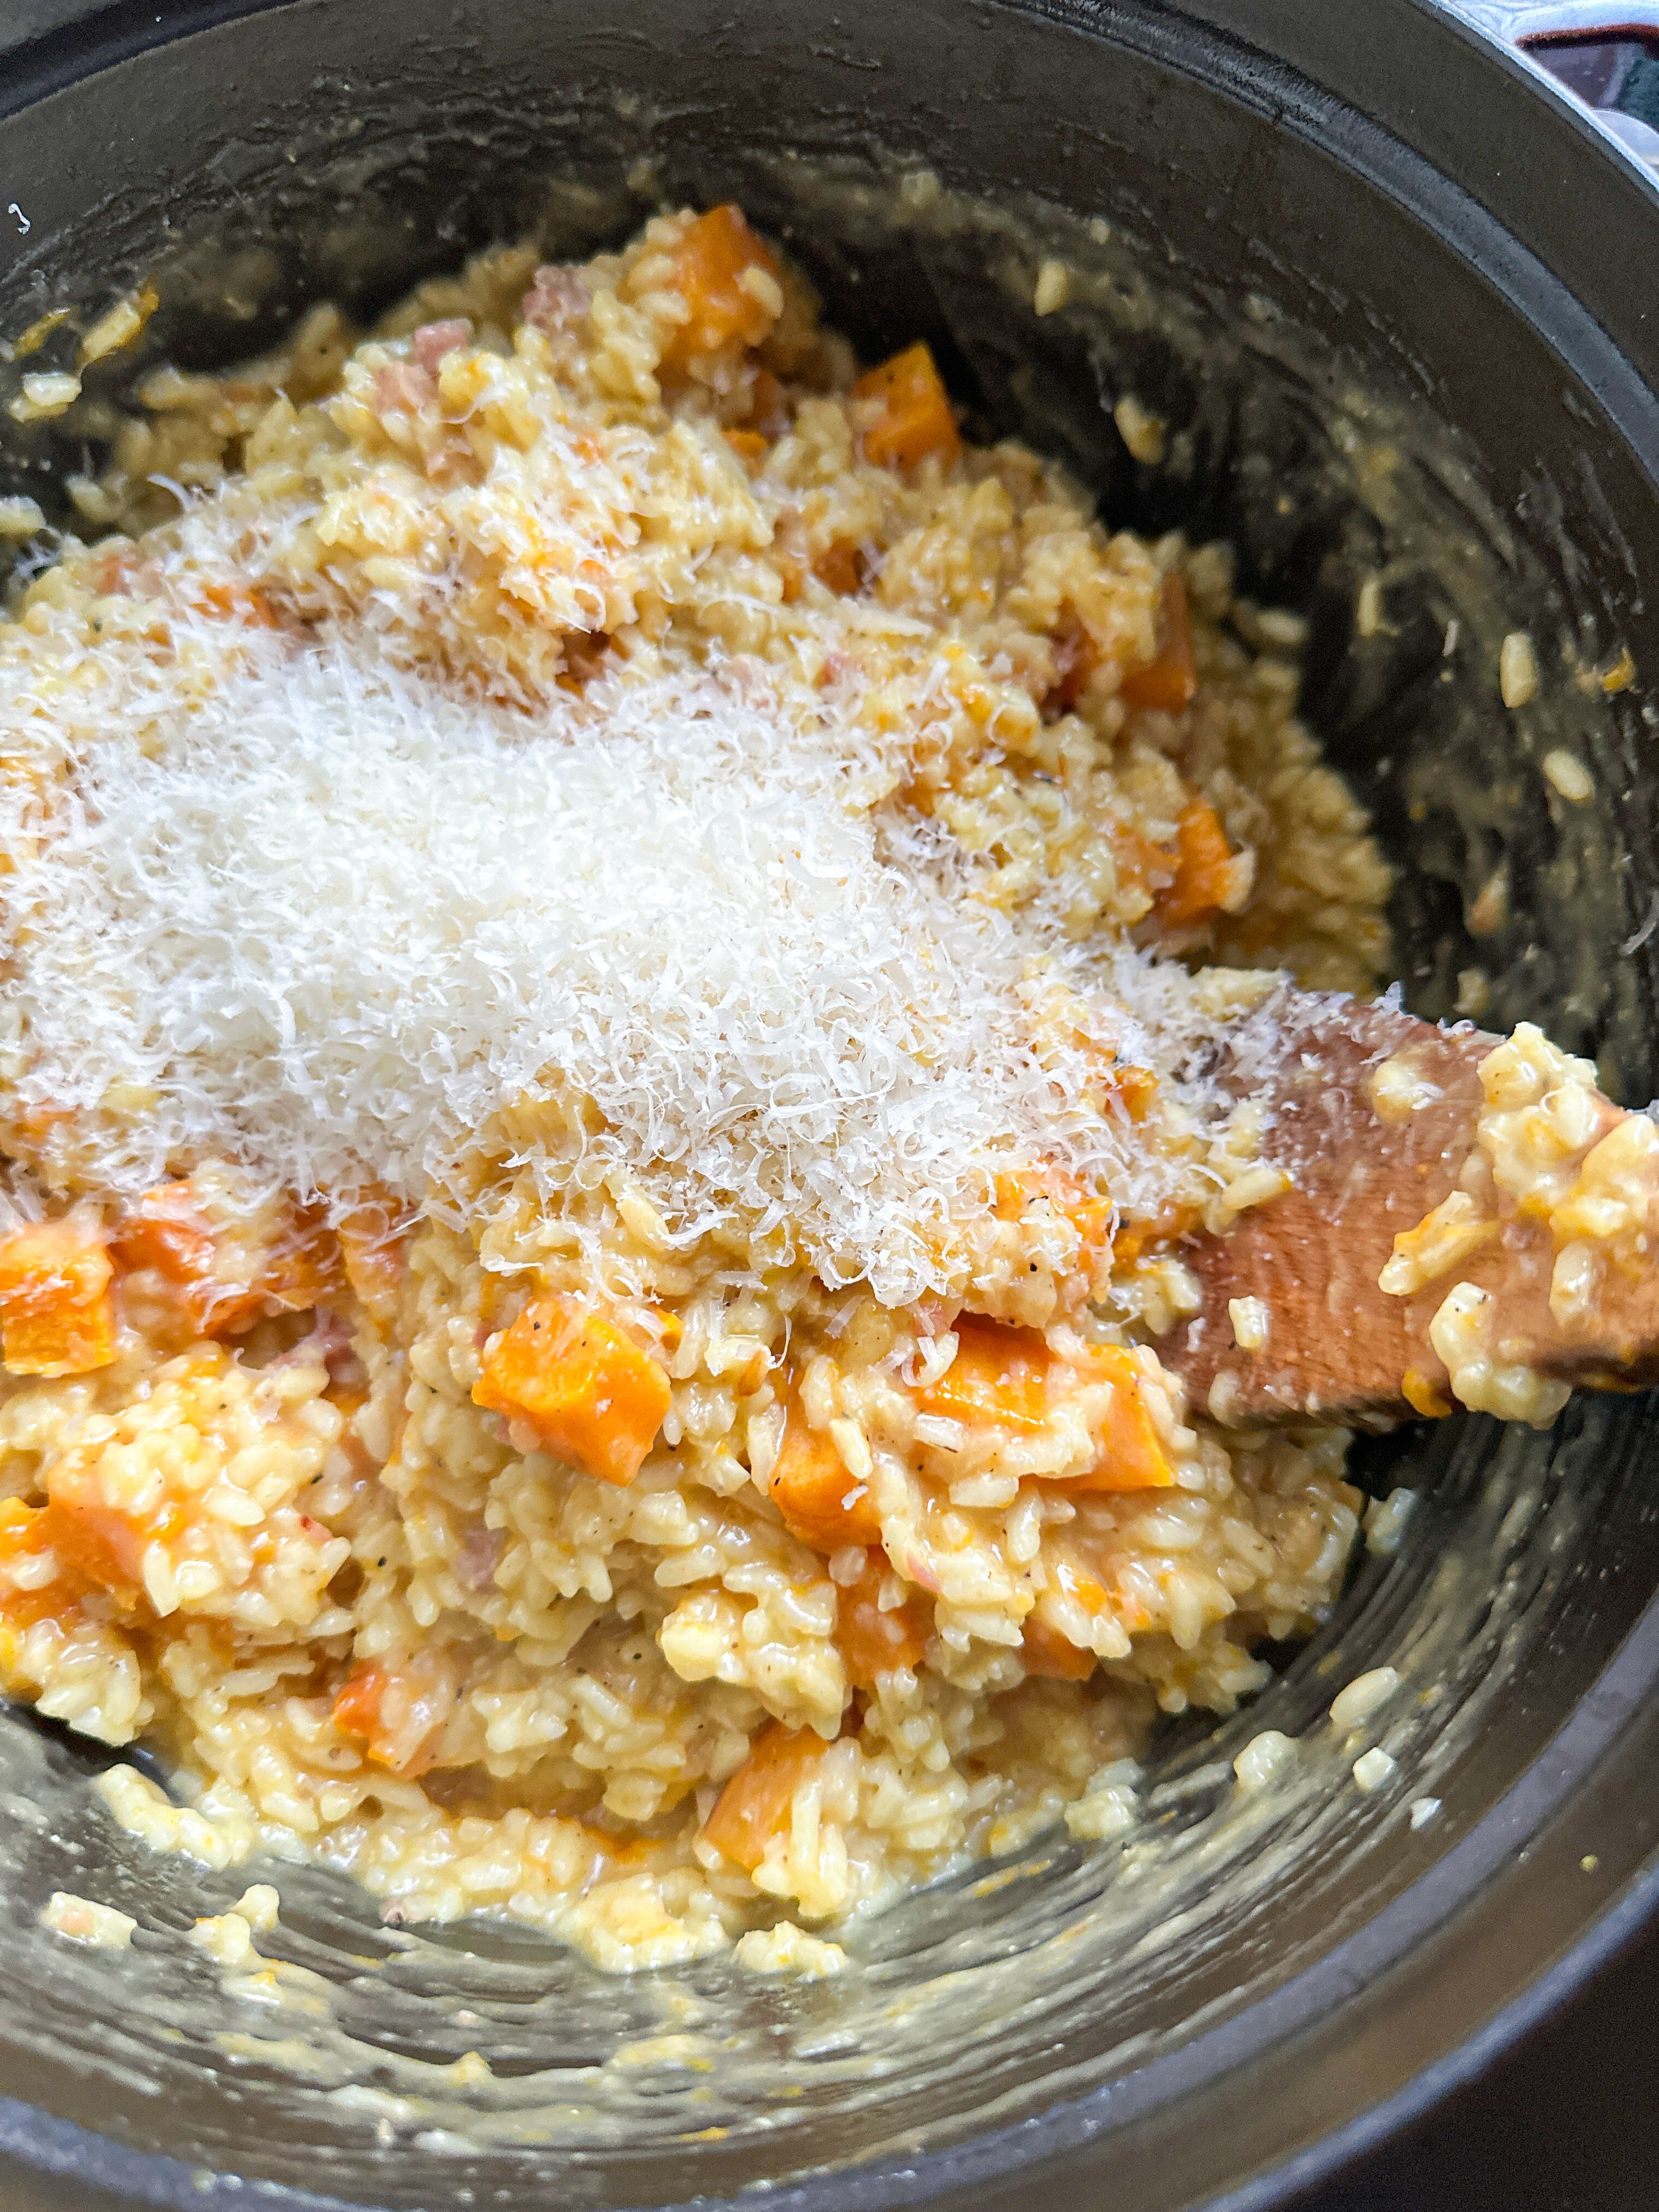 Grated Parmesan cheese on top of the risotto and butternut squash mixture